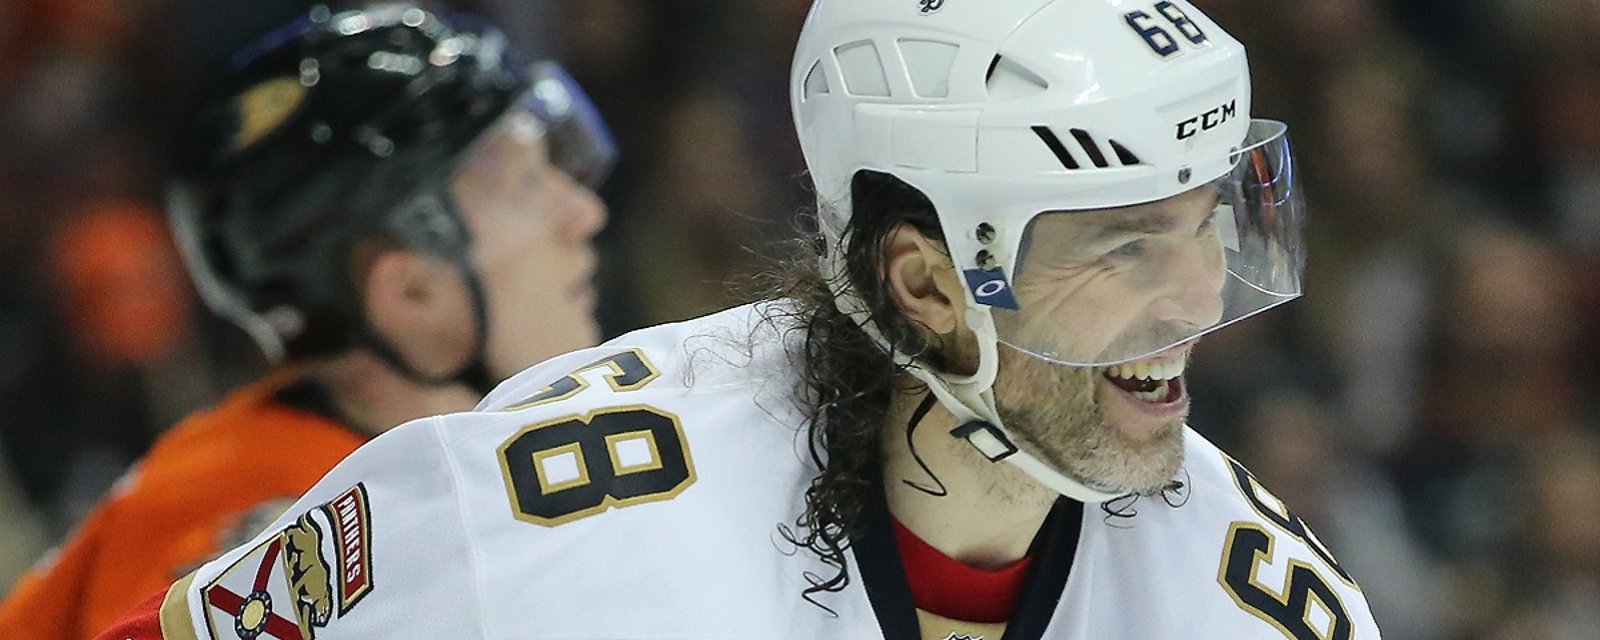 Jaromir Jagr shares hilarious picture from his COVID lockdown.